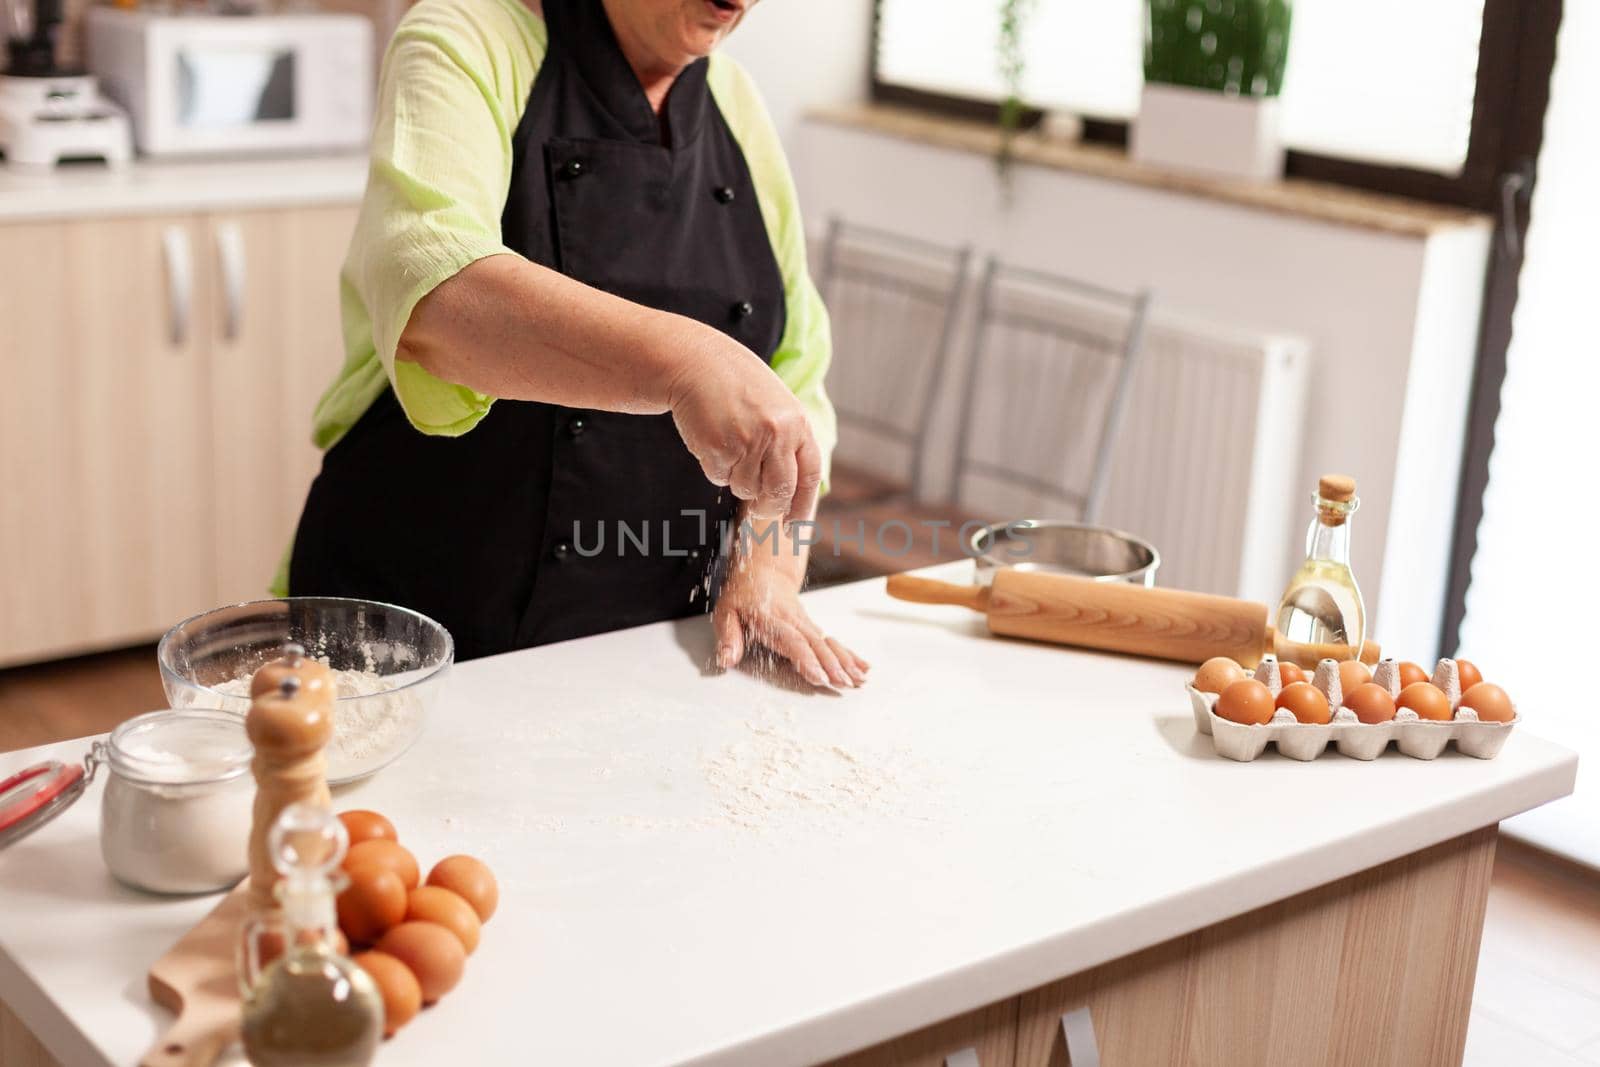 Grandmother preparing homemade donuts wearing kitchen apron. Retired senior chef with bonete and apron, in kitchen uniform sprinkling sieving sifting ingredients by hand baking homemade pizza and bread